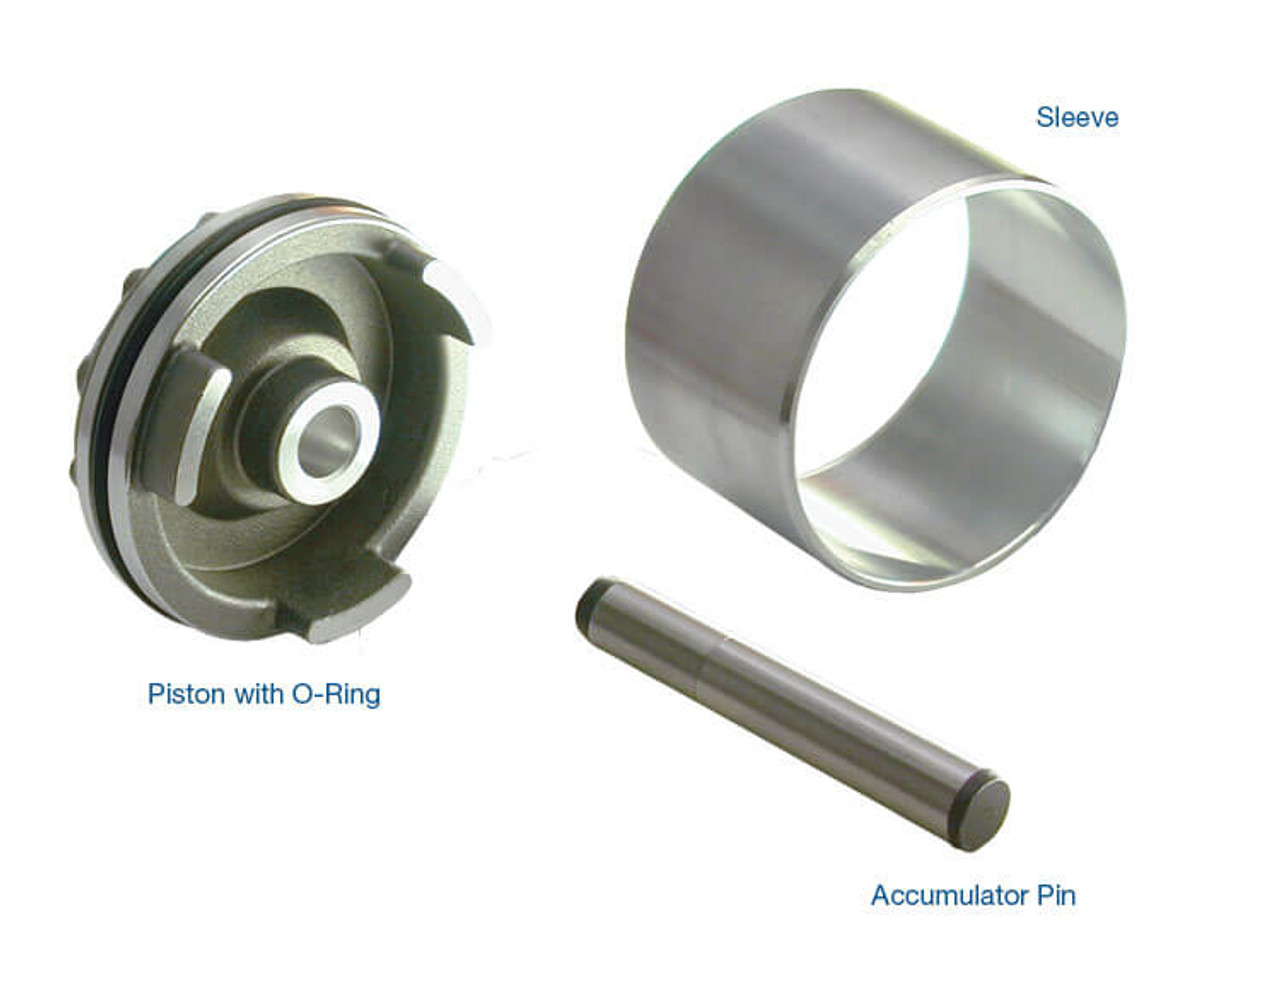 Sonnax 3-4 accumulator sleeve kit comes with an aluminum sleeve, a replacement piston with an O-ring, and a new accumulator pin. It is compatible with all OE accumulator springs.